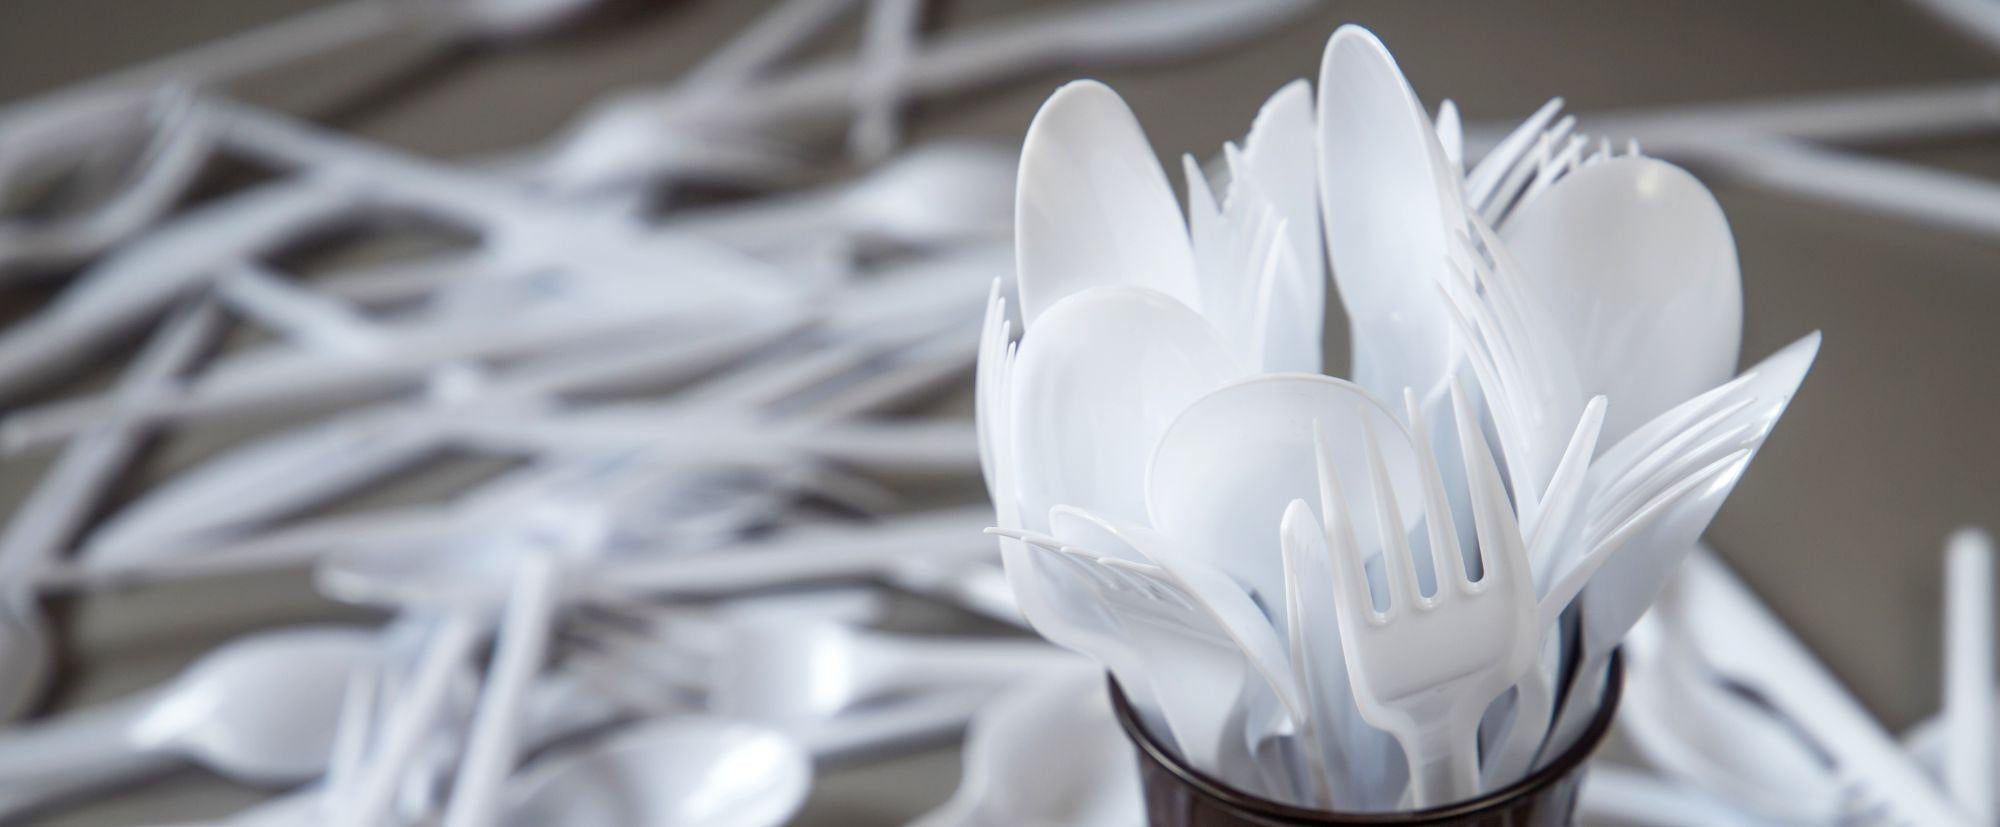 Can You Recycle Plastic Silverware?